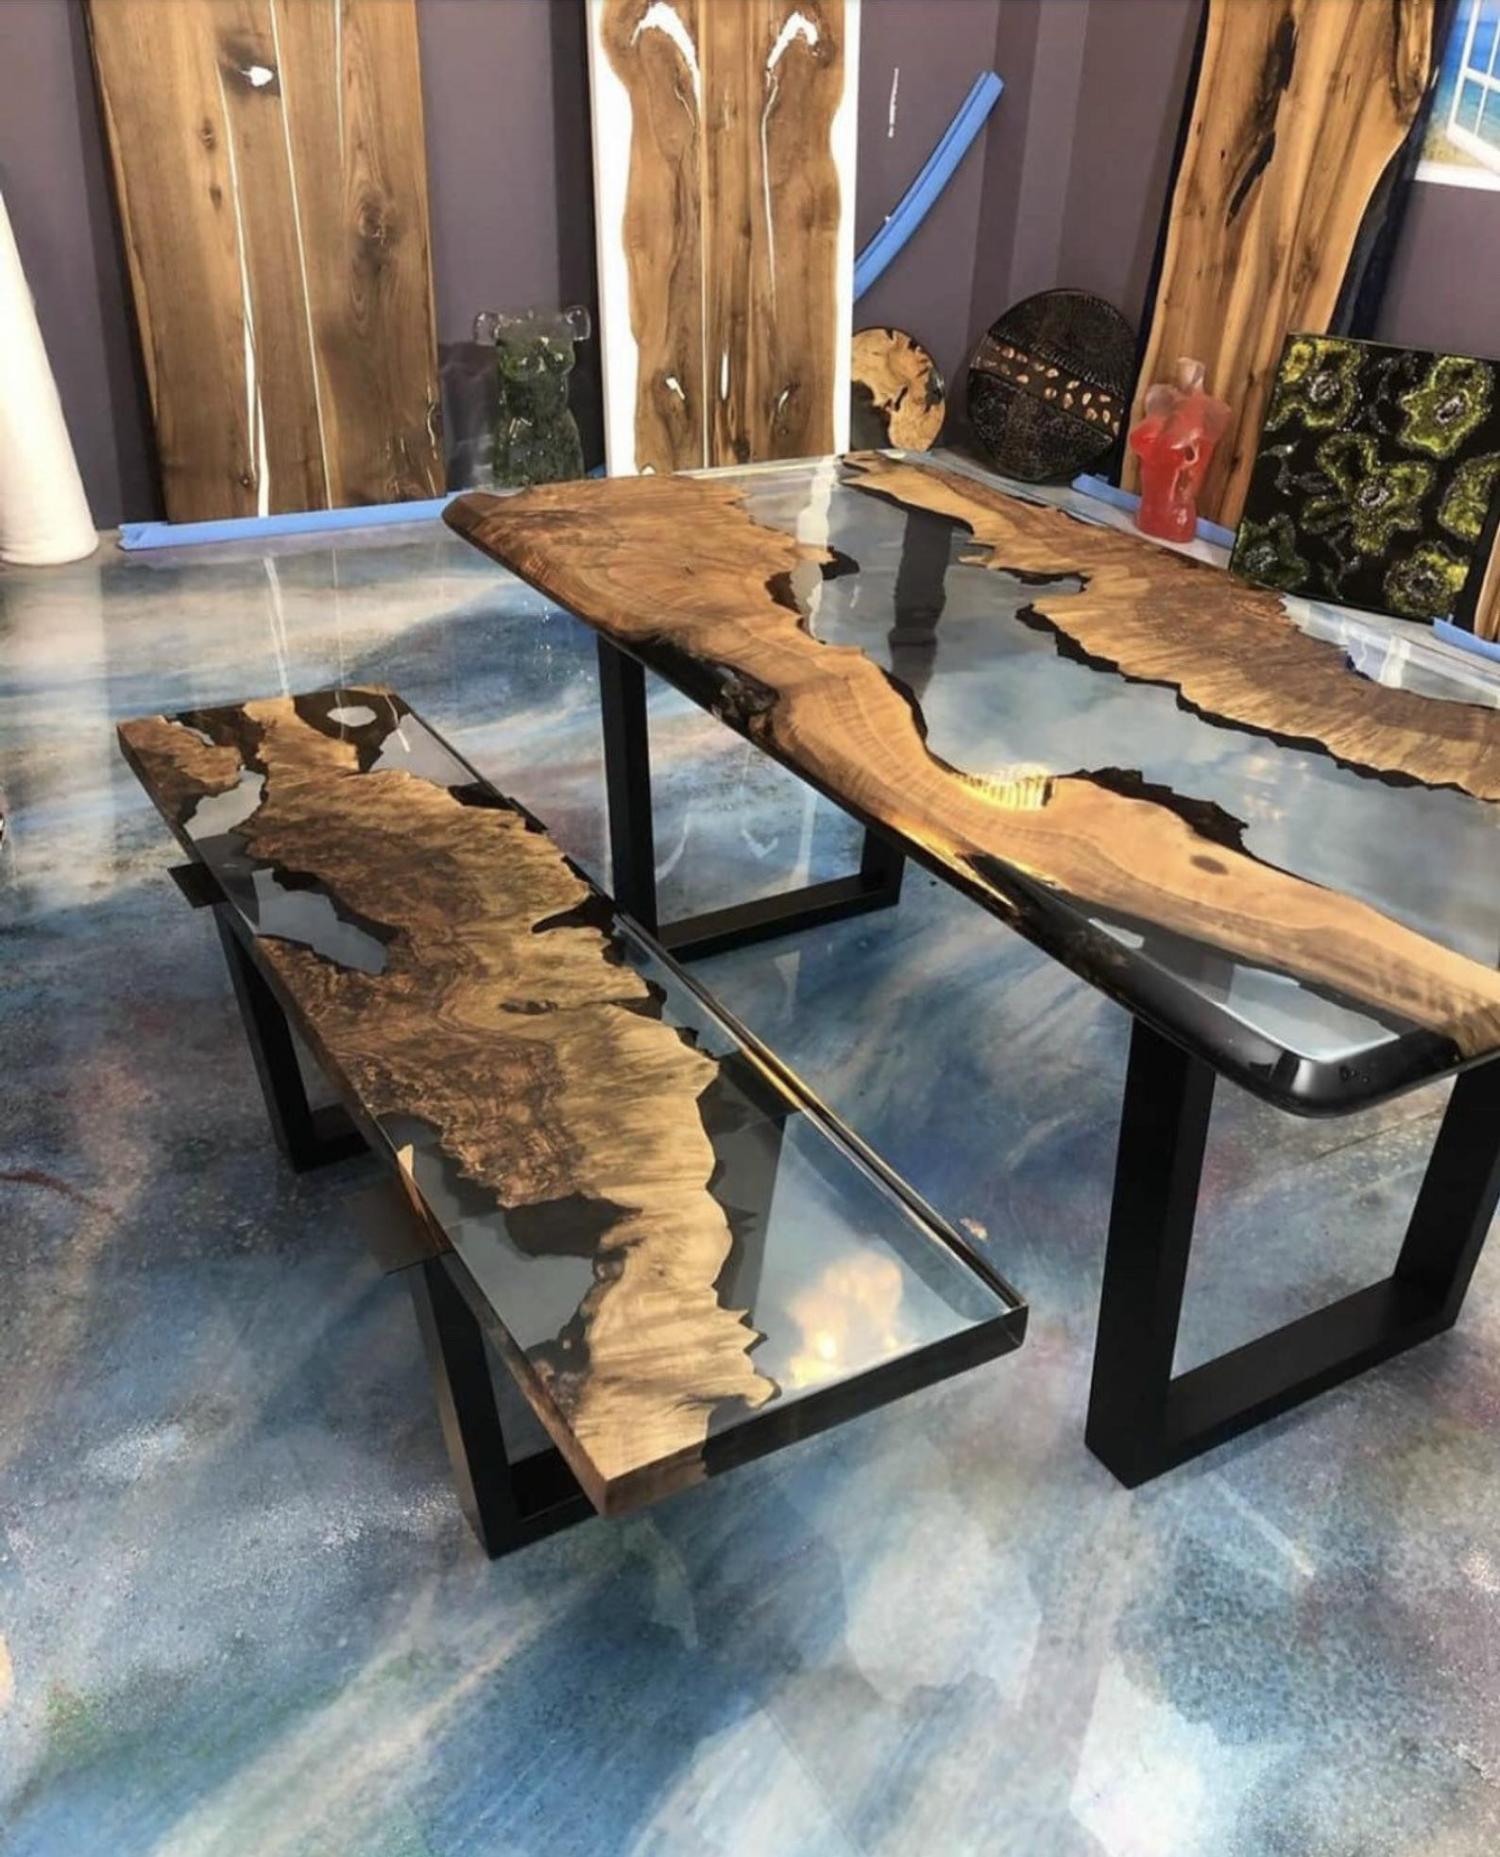 this-blue-river-epoxy-table-is-absolutely-stunning-2440.jpg